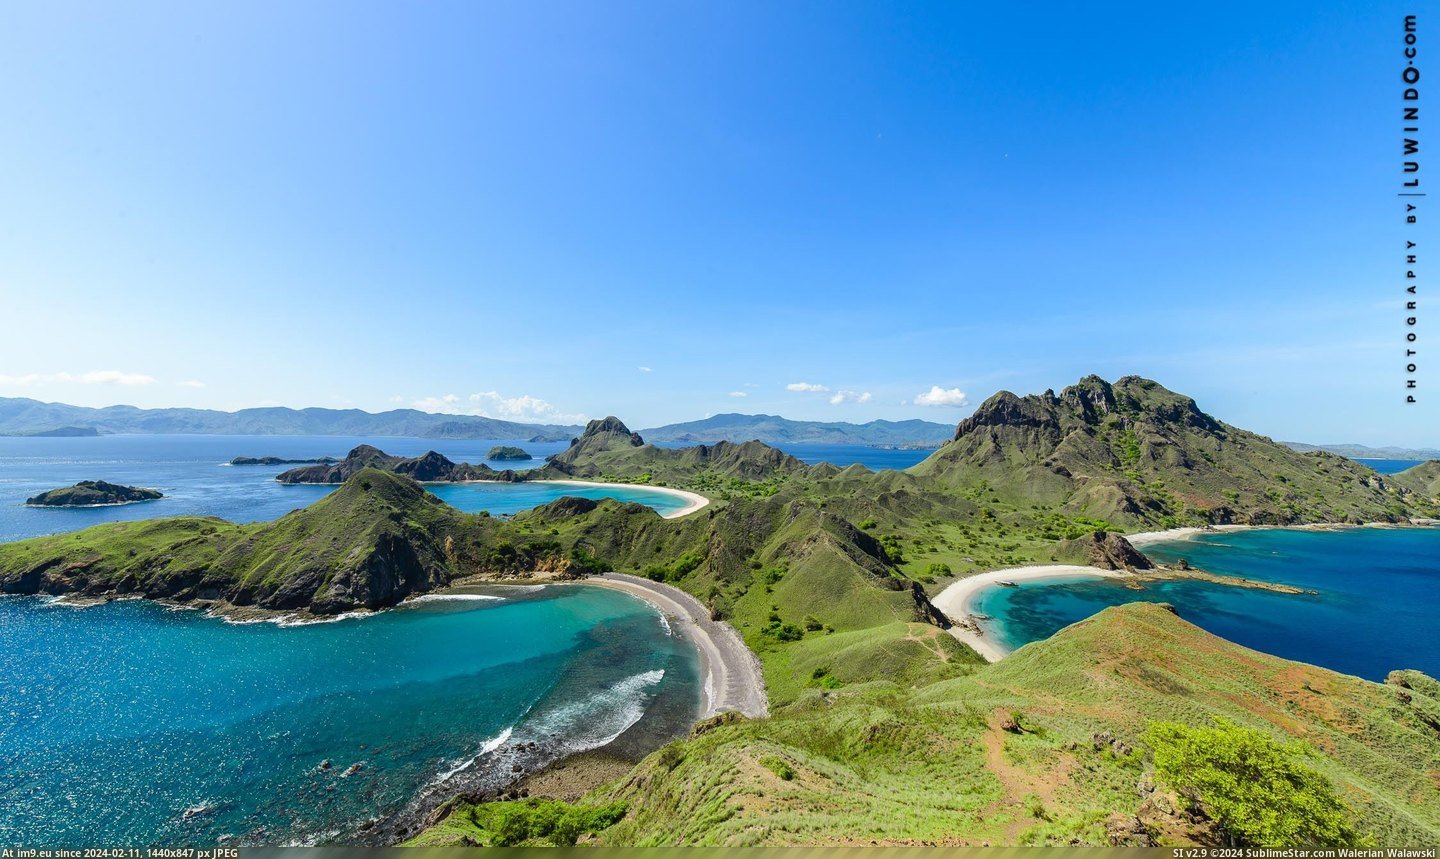 [Earthporn] Padar Island, Flores, Indonesia - Mountain top view [2248x1334] (in My r/EARTHPORN favs)